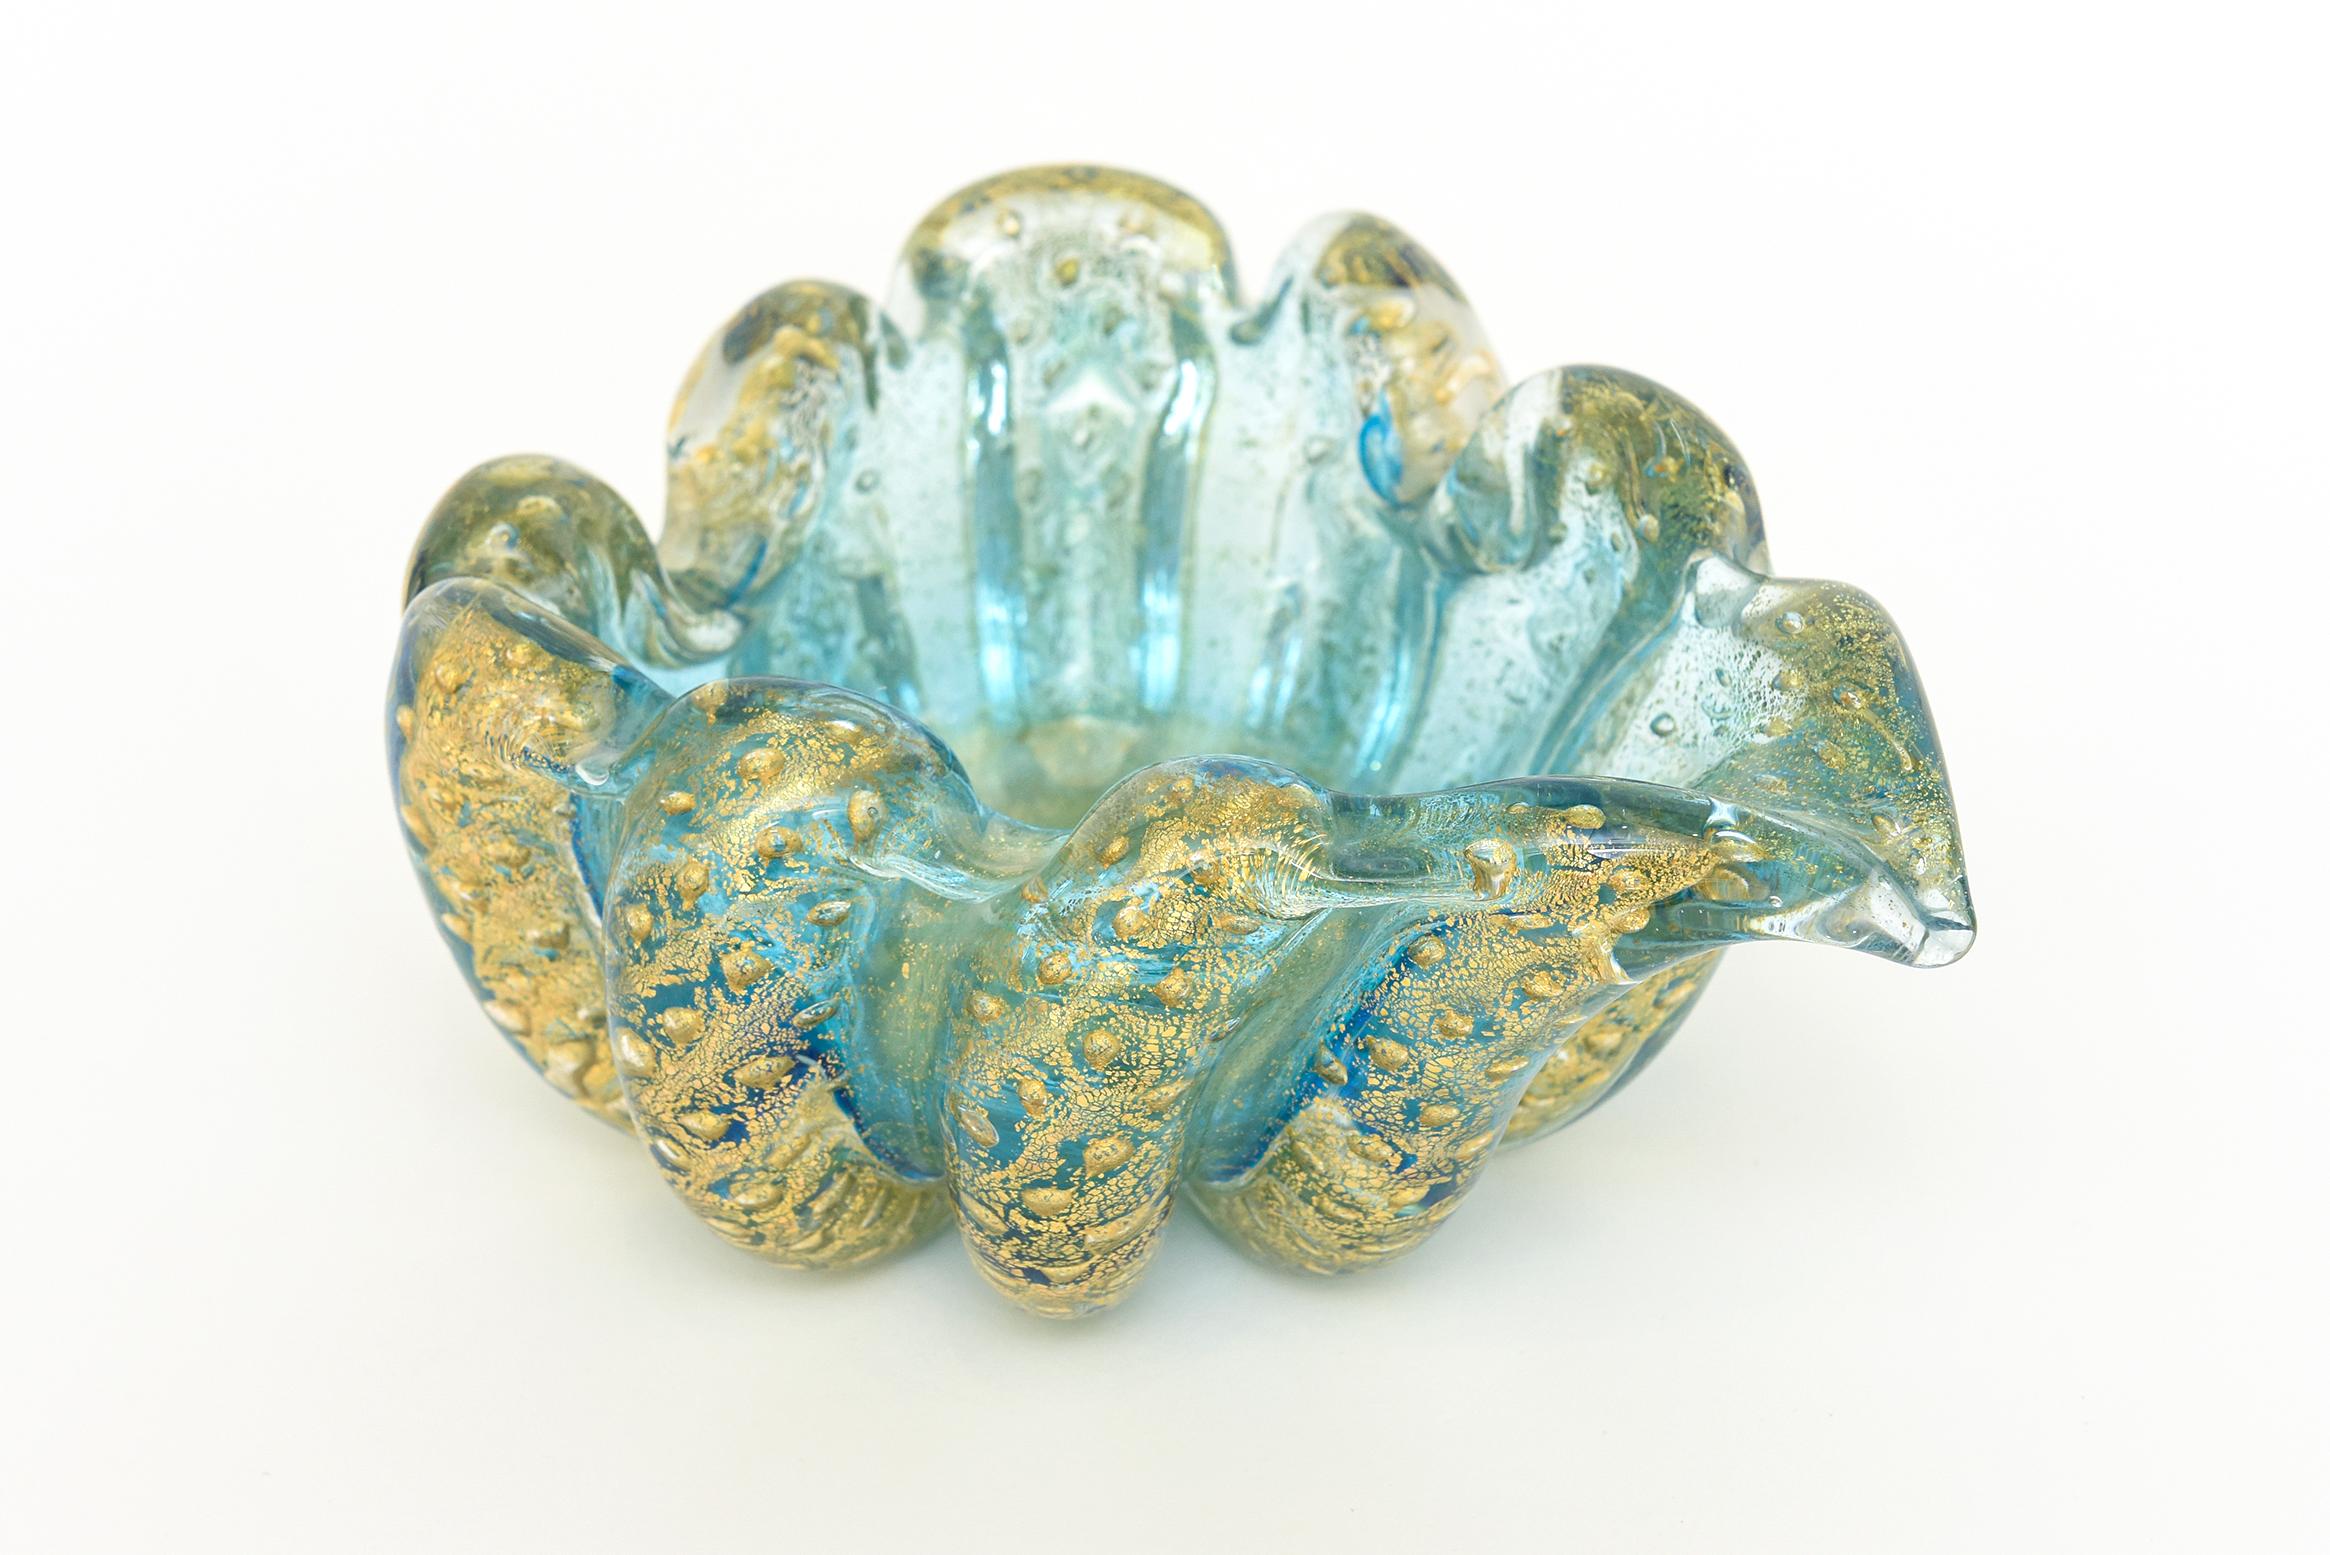 This stunning and magnificent color of sea mist turquoise and gold in this vintage Murano Italian Mid-Century Modern bowl is by the maestros; Barovier e Toso. It is of the Cordonato d' Oro technique where twisted ropes of gold are applied in each